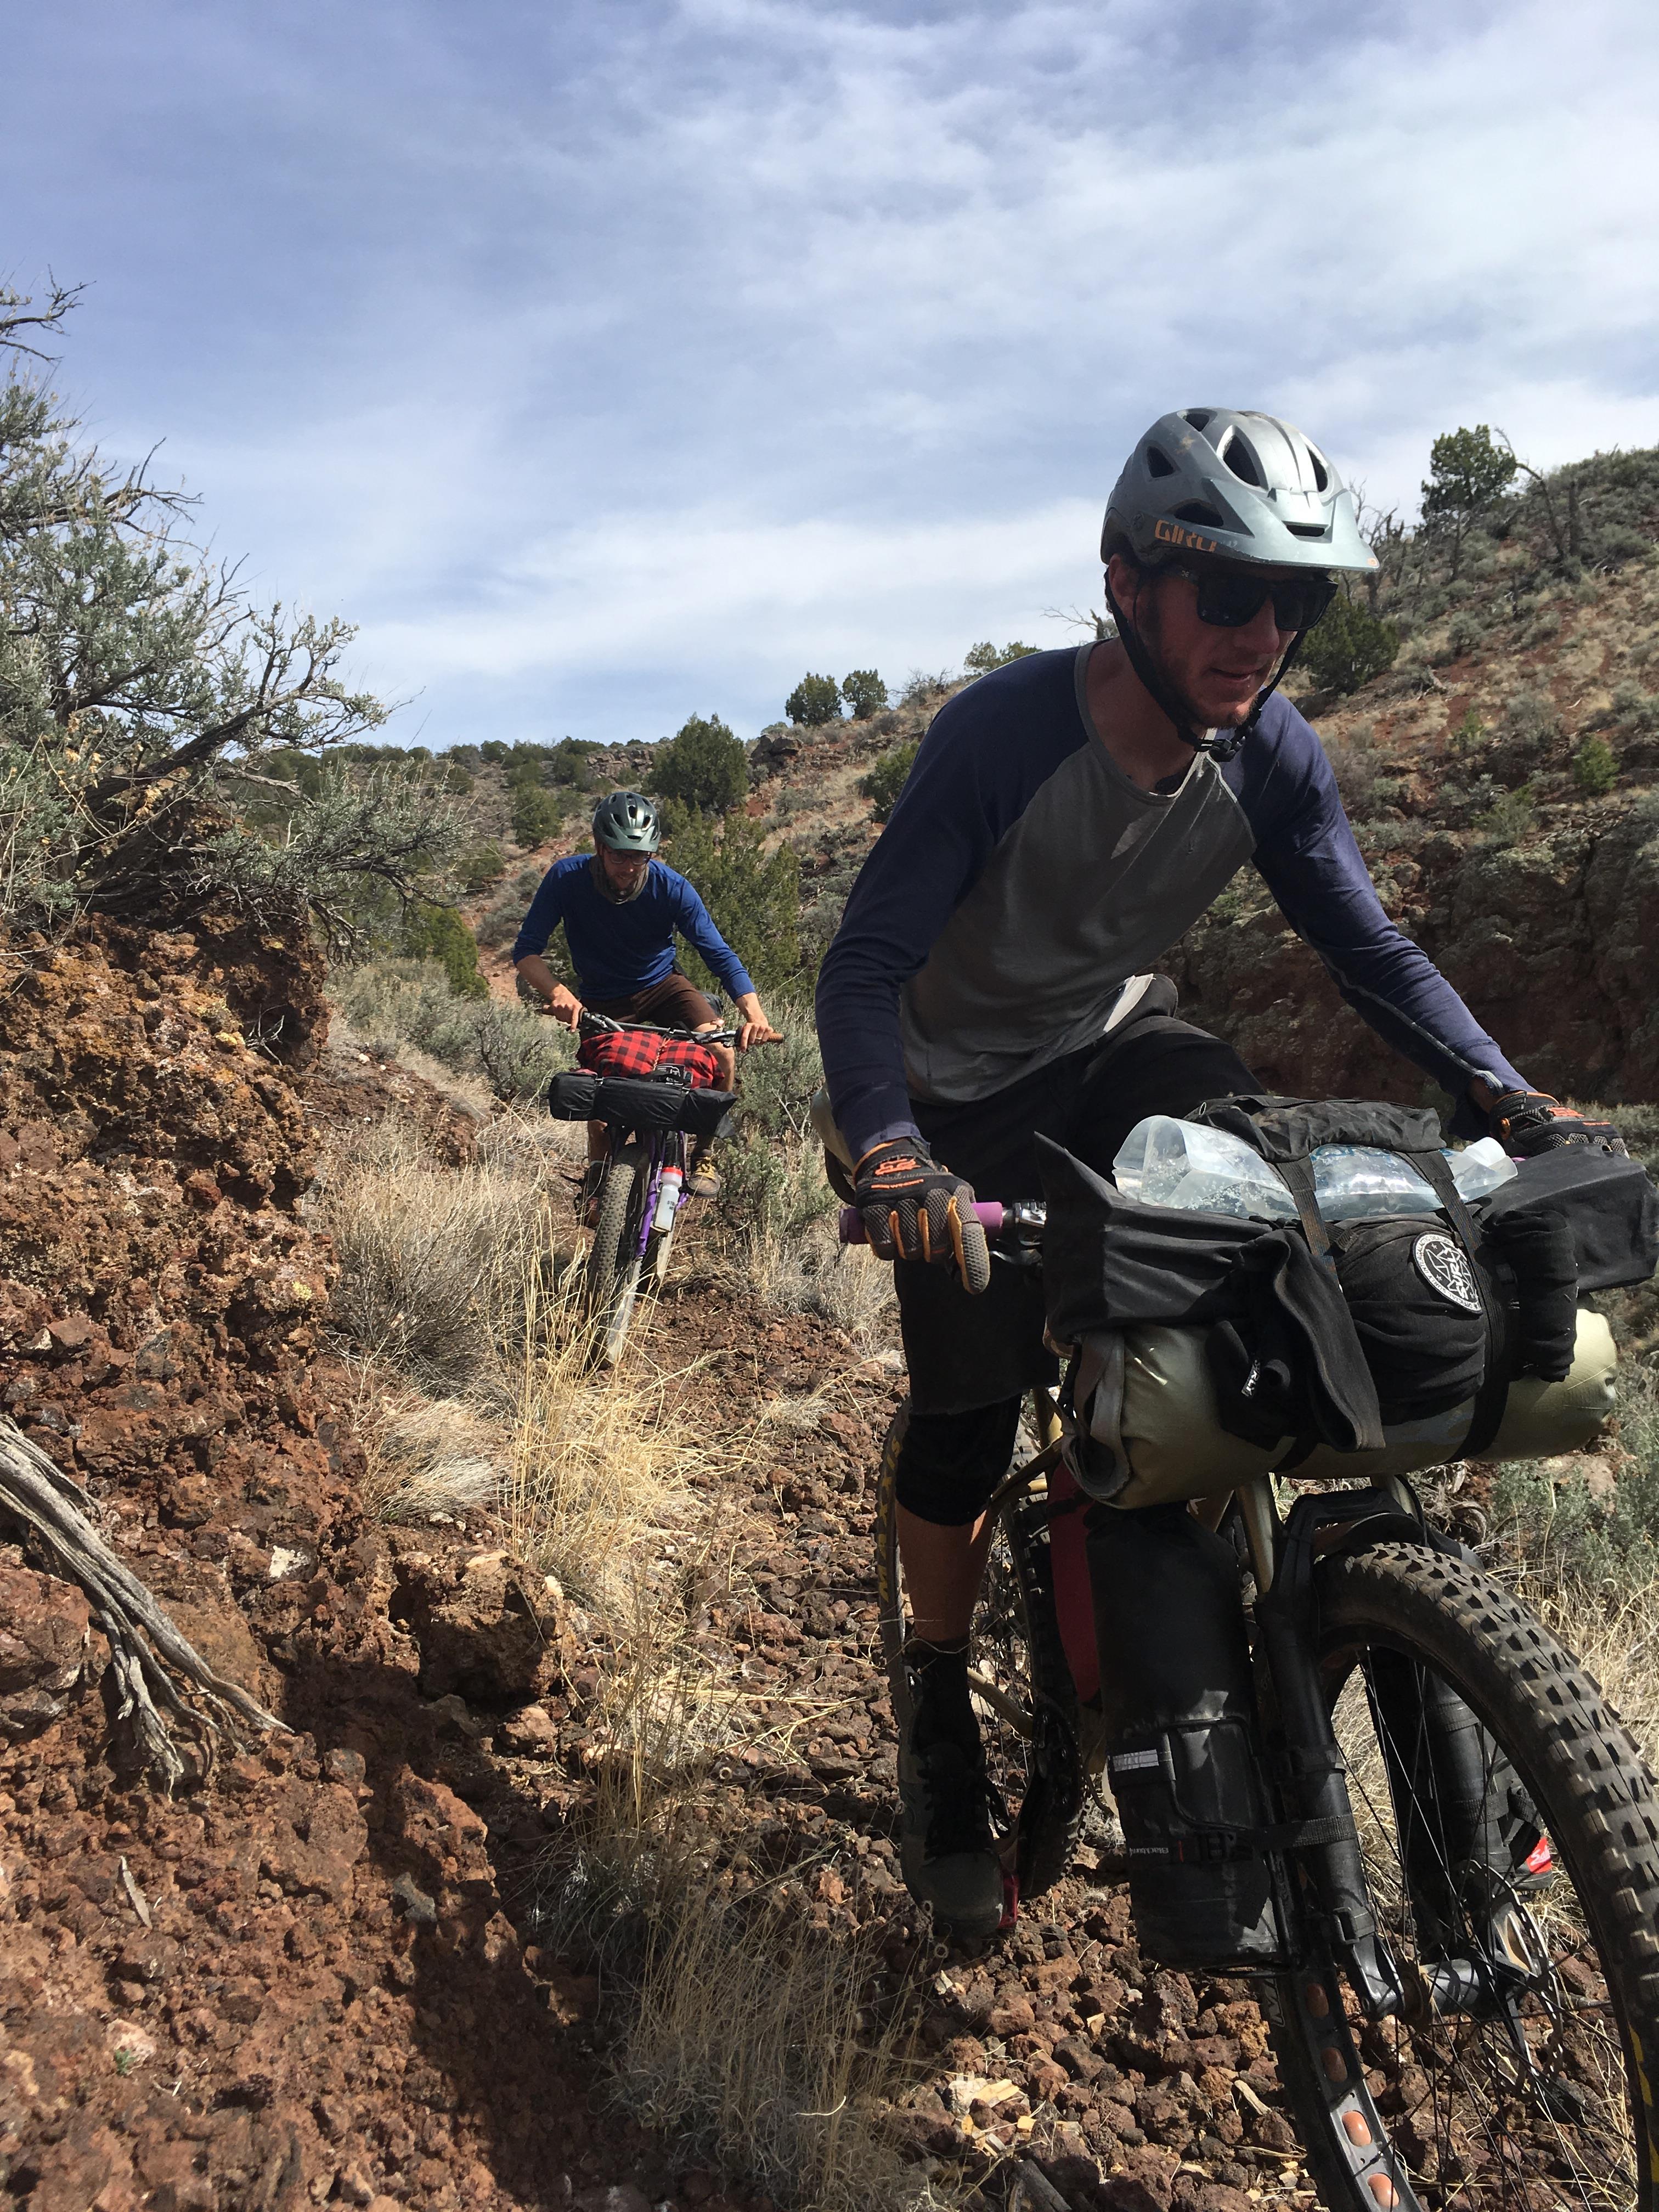 Vertical view of a horizontal front view image showing cyclists with gear loaded bikes on a rocky desert trail